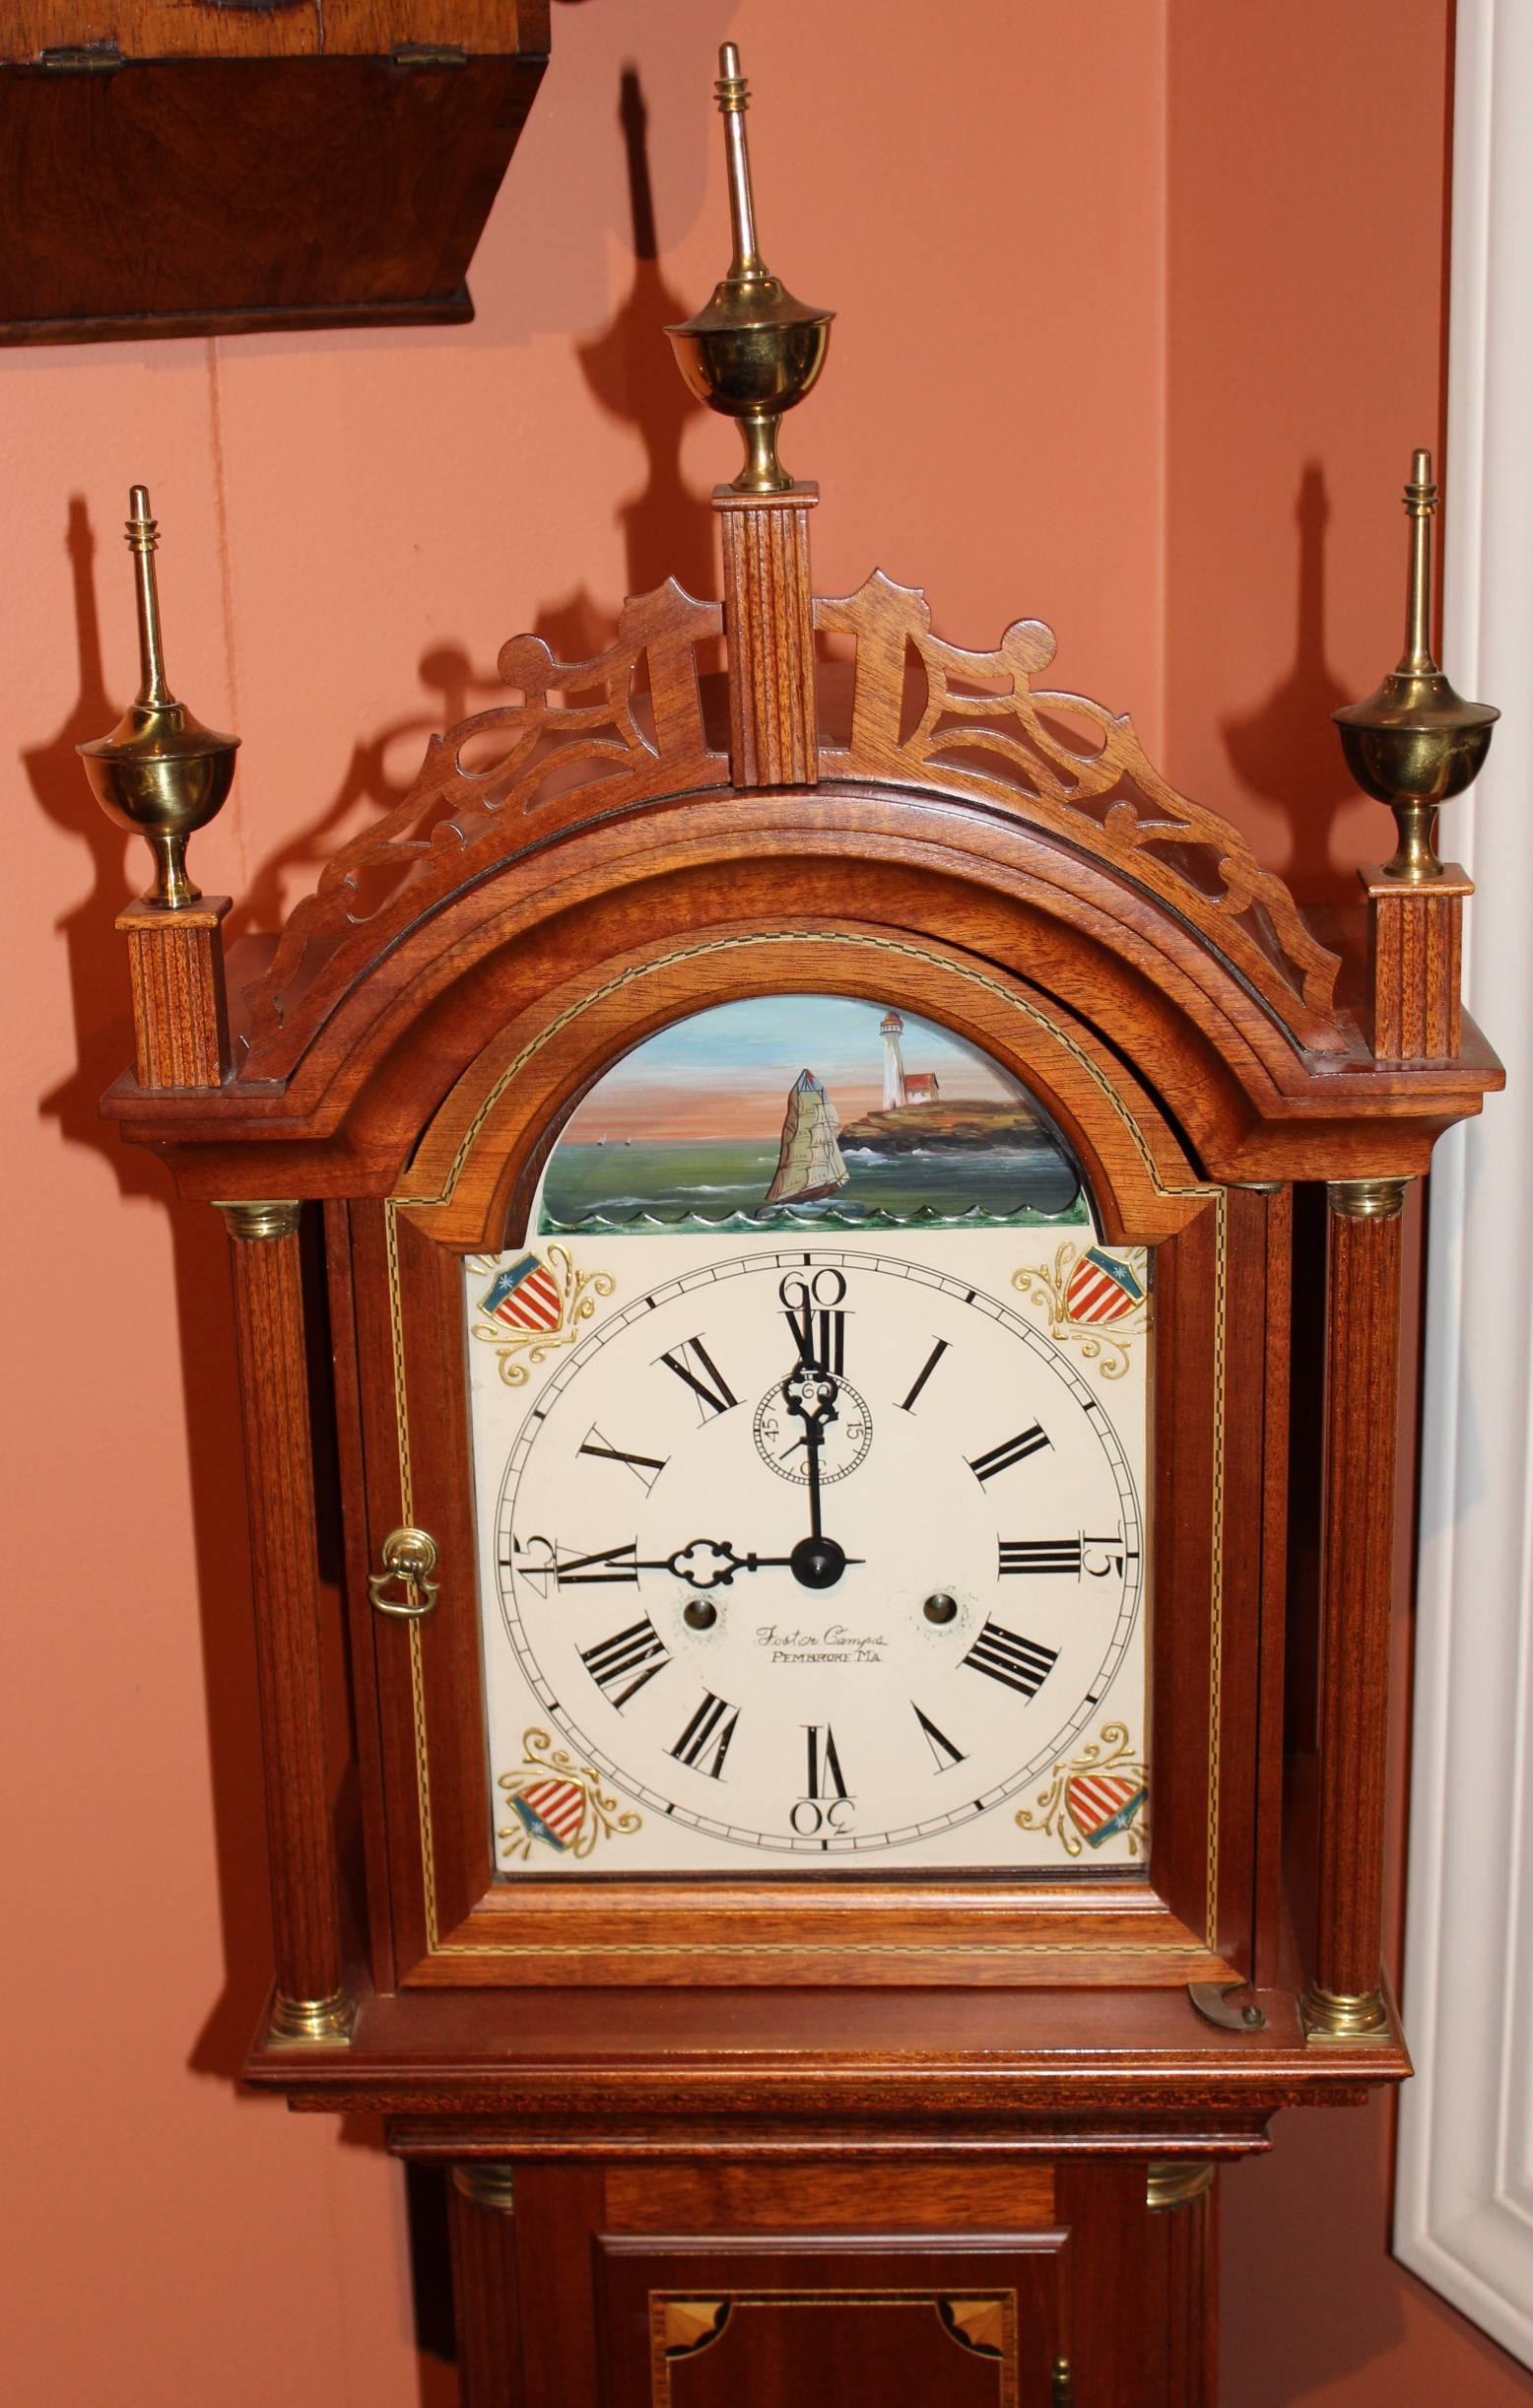 A wonderfully made mahogany case grandmother tall clock by well known clockmaker Foster S. Campos (1926-2007.) Foster Campos created some of the finest replicas of classic early American timepieces that are available today. Handpainted polychrome